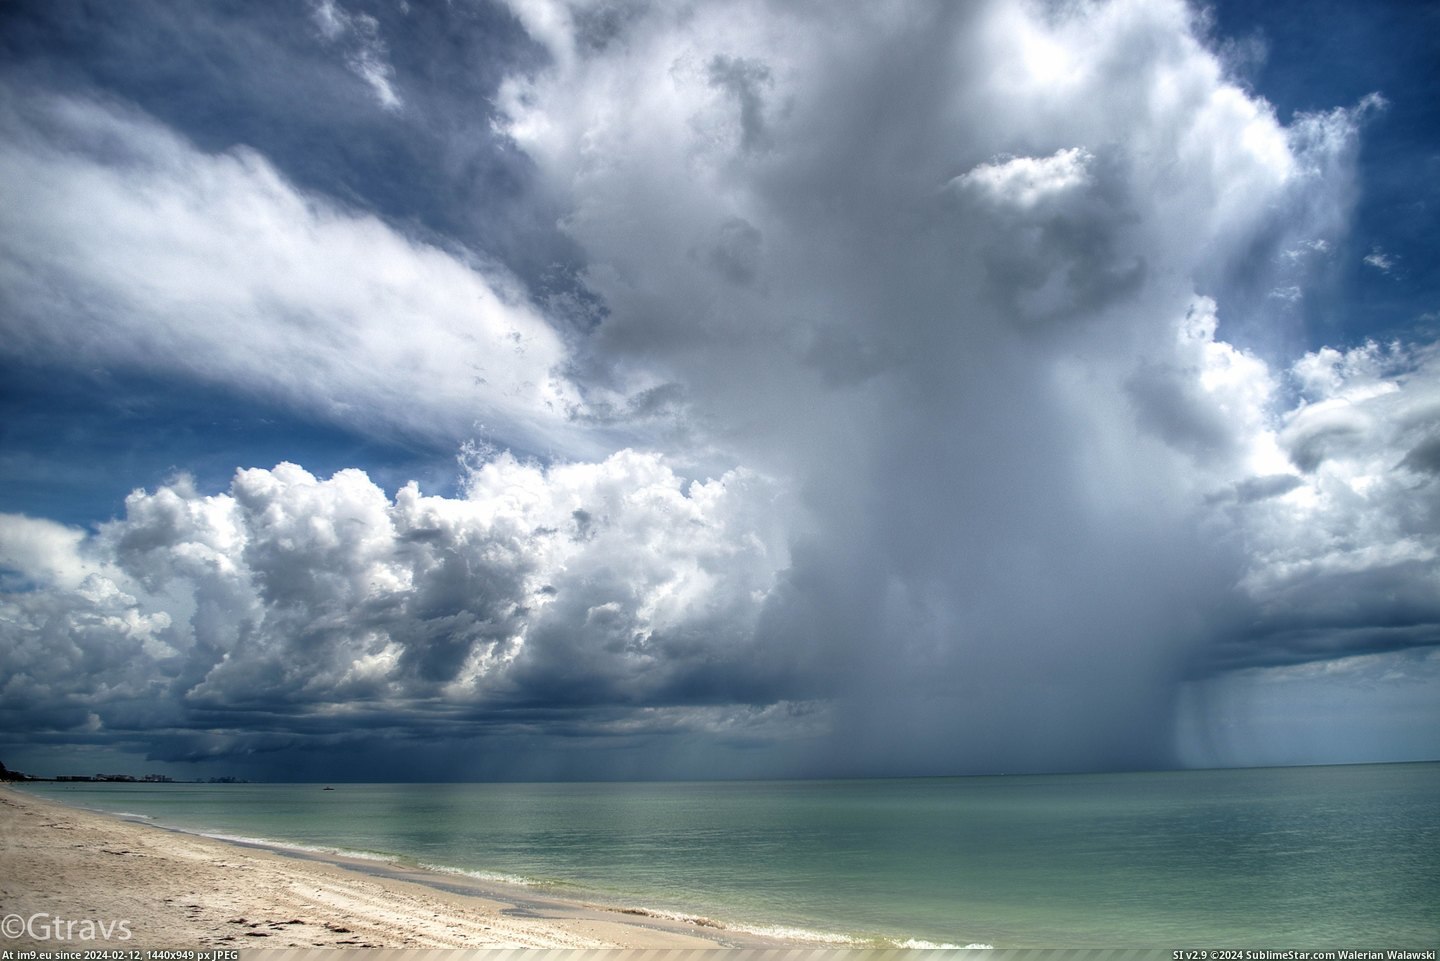 #Photo #Shower #North #Miles #Greg #Isolated #Travers #Rain #Naples #Florida [Earthporn] A photo I took of an isolated rain shower about 15 miles north of Naples, Florida. ©Greg Travers [4935x3266] Pic. (Изображение из альбом My r/EARTHPORN favs))